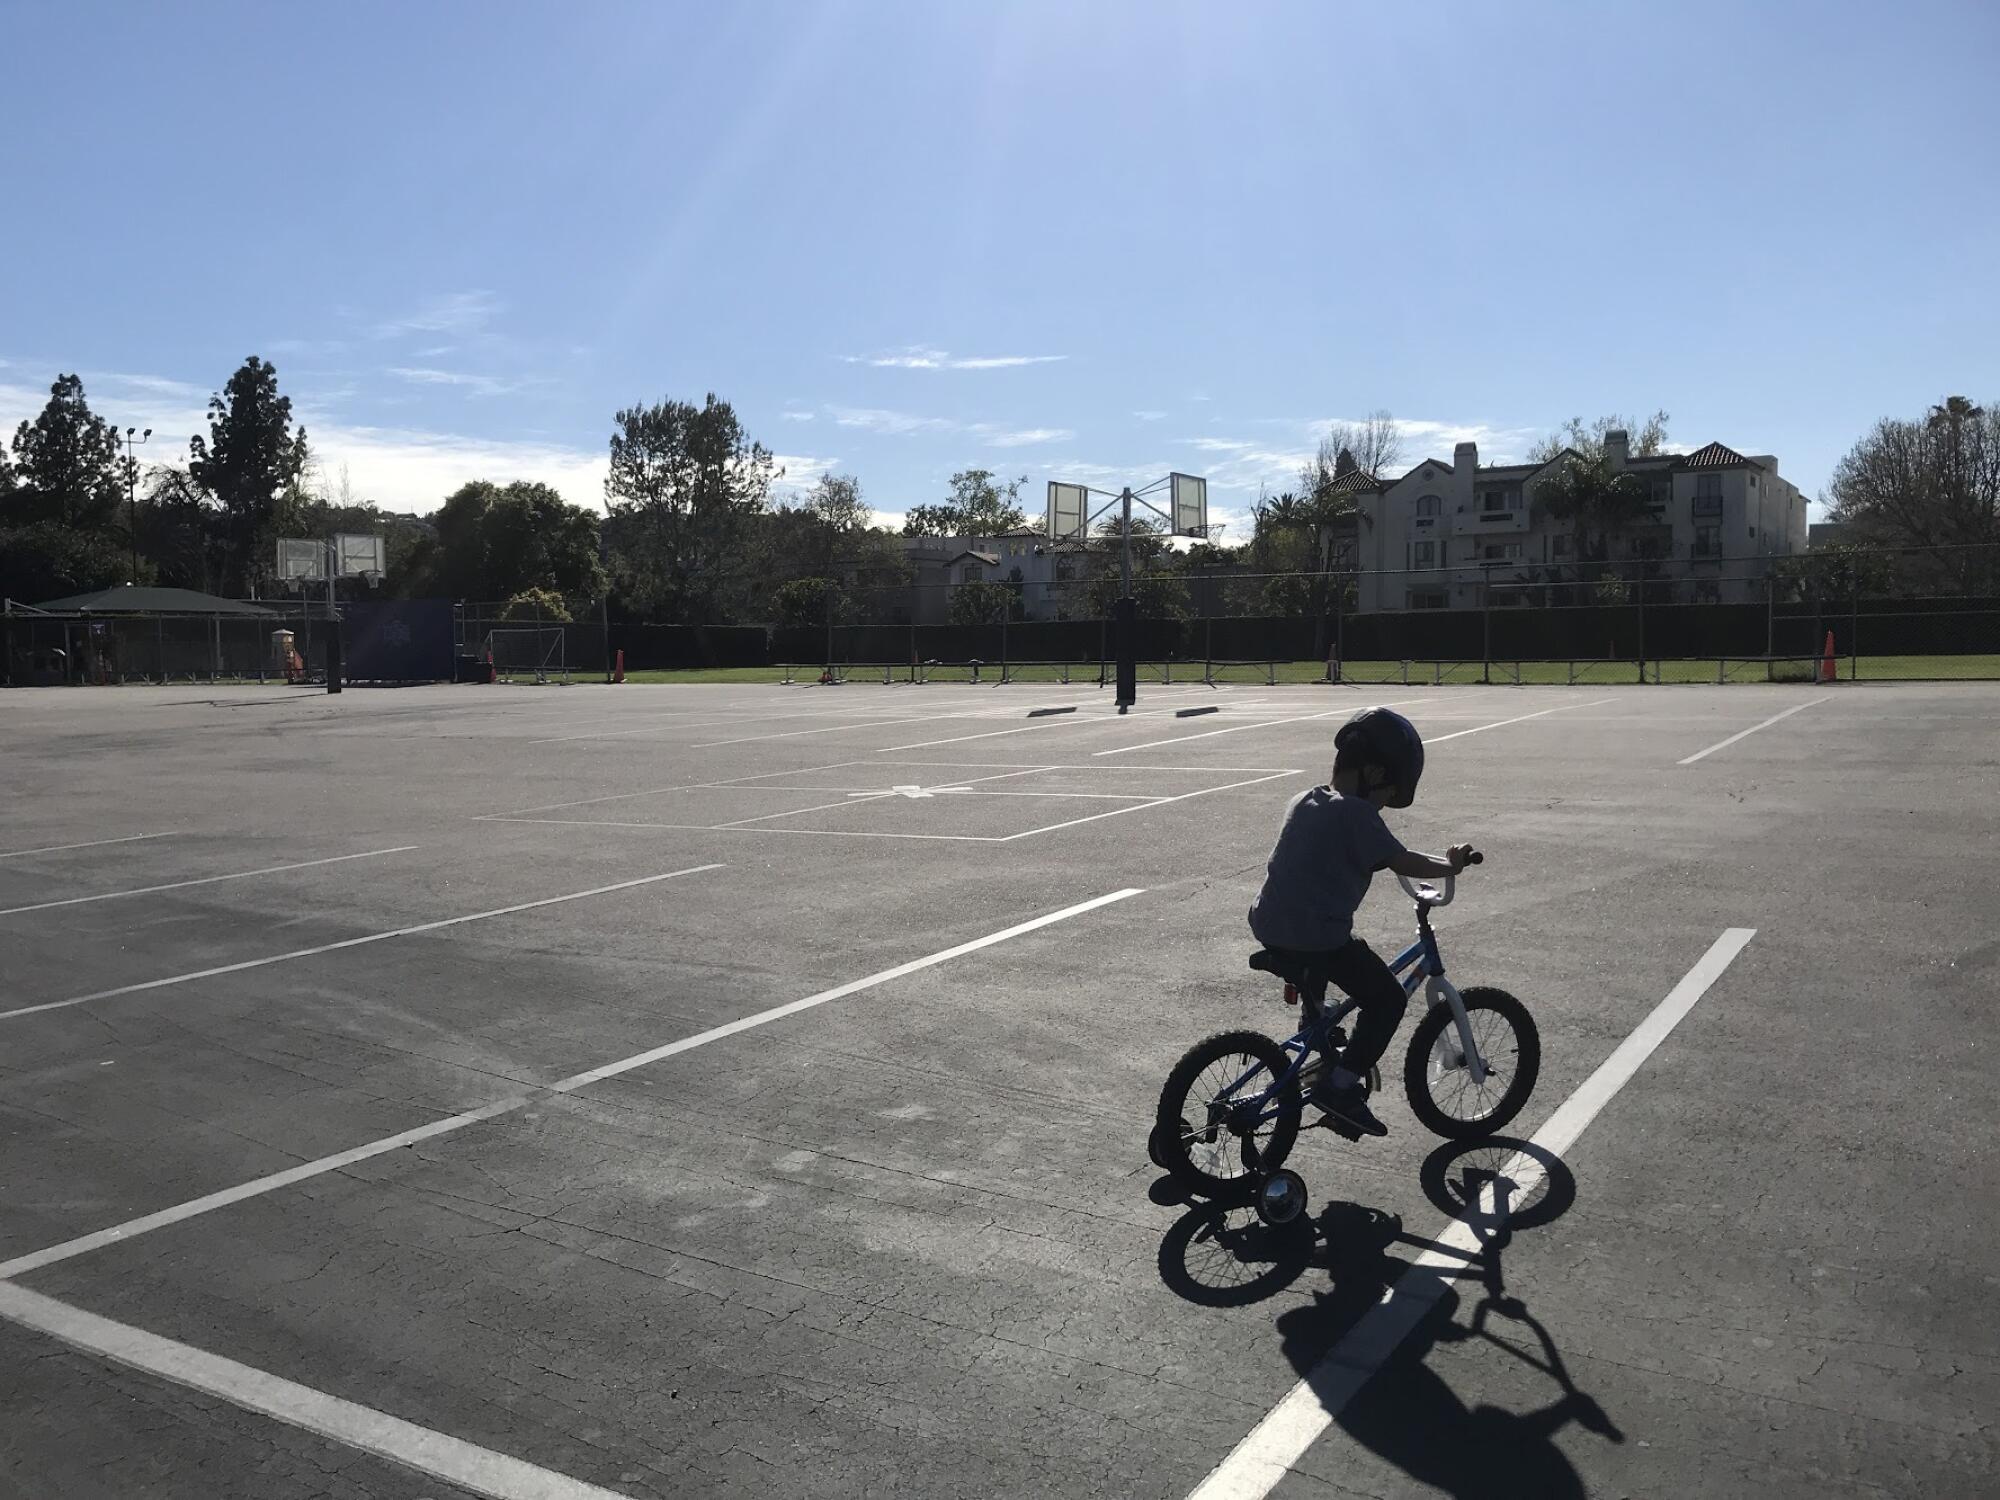  Boy riding his bike in a secluded parking lot